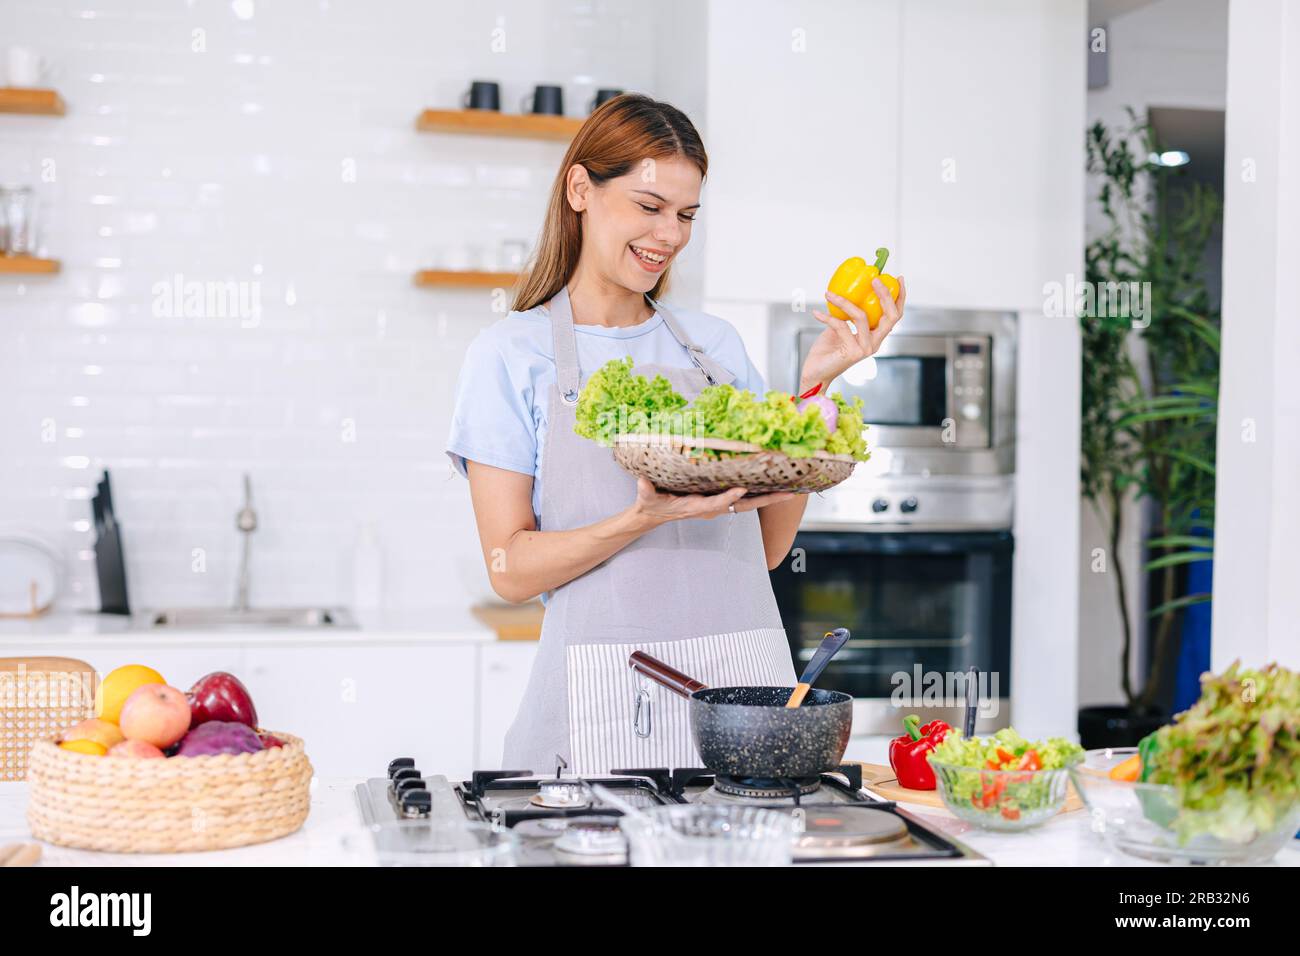 Happy Young Woman Making Salad. People Eating Healthy Food. Vegan Lady In Kitchen Home. Eat Vegetable For Dieting. Prepare Diet Meal At Island Stove. Stock Photo